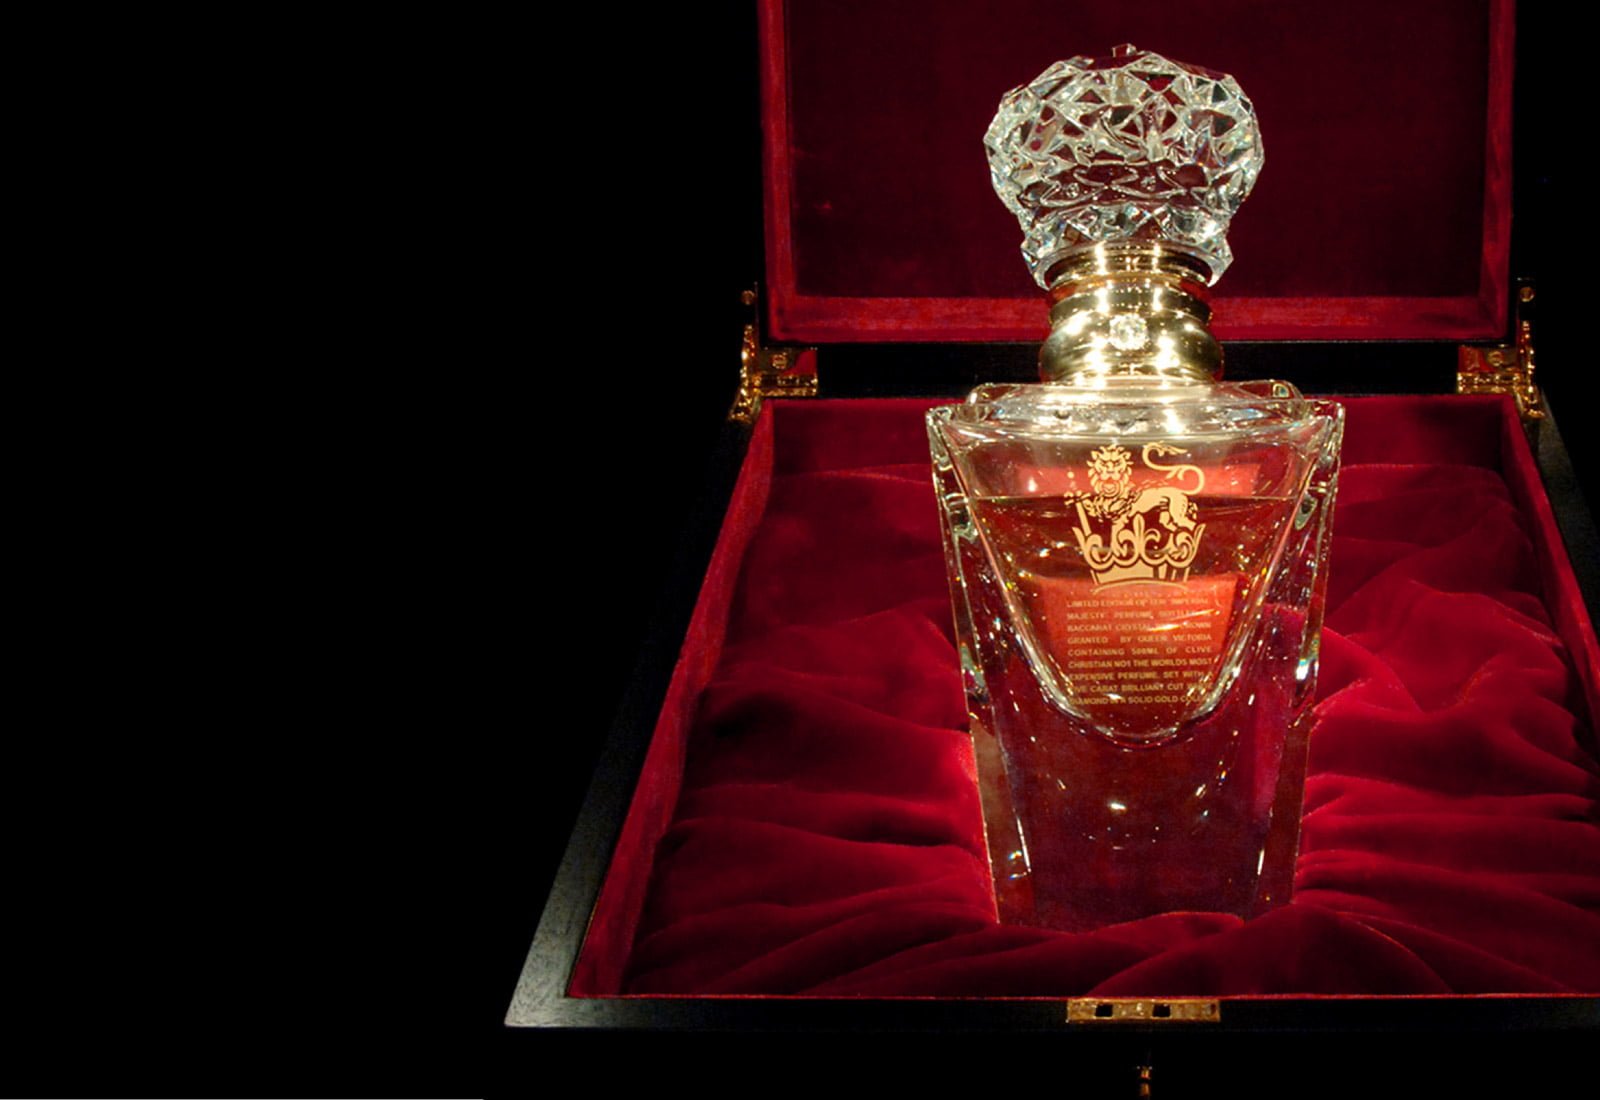 These Are The 15 Most Expensive Things in The World